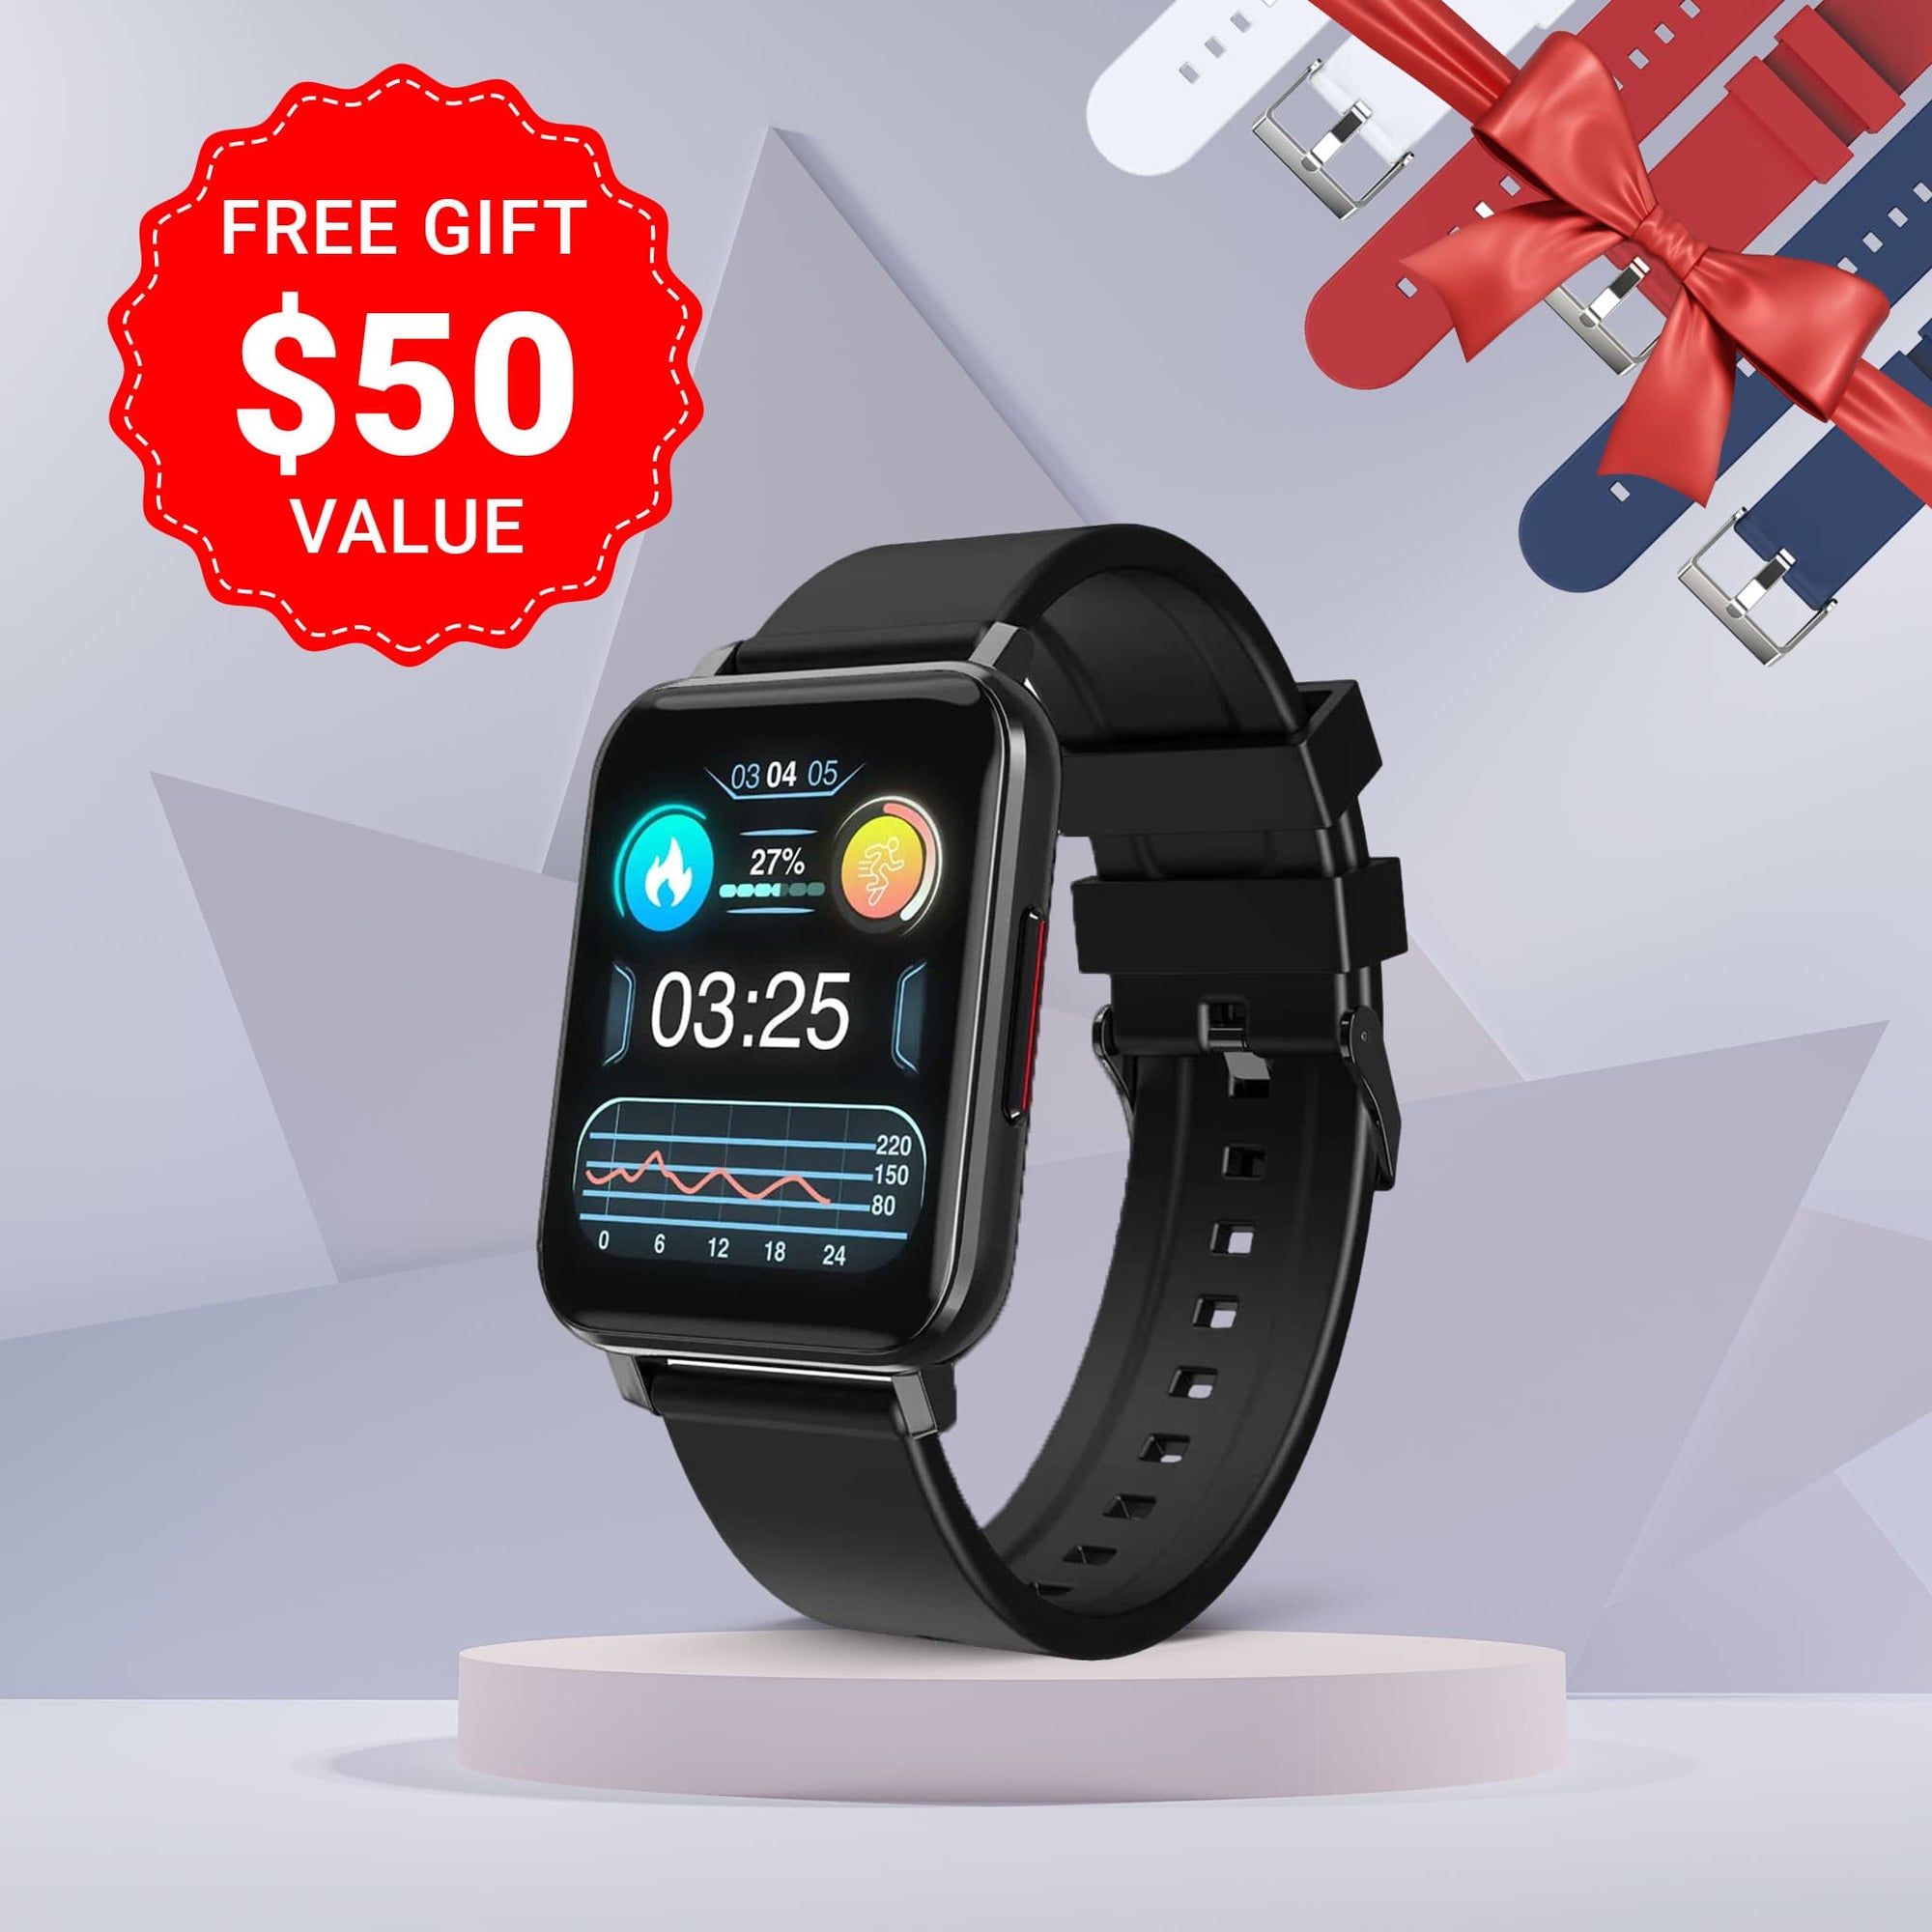 Health Smartwatch 2 + 3 FREE Bands